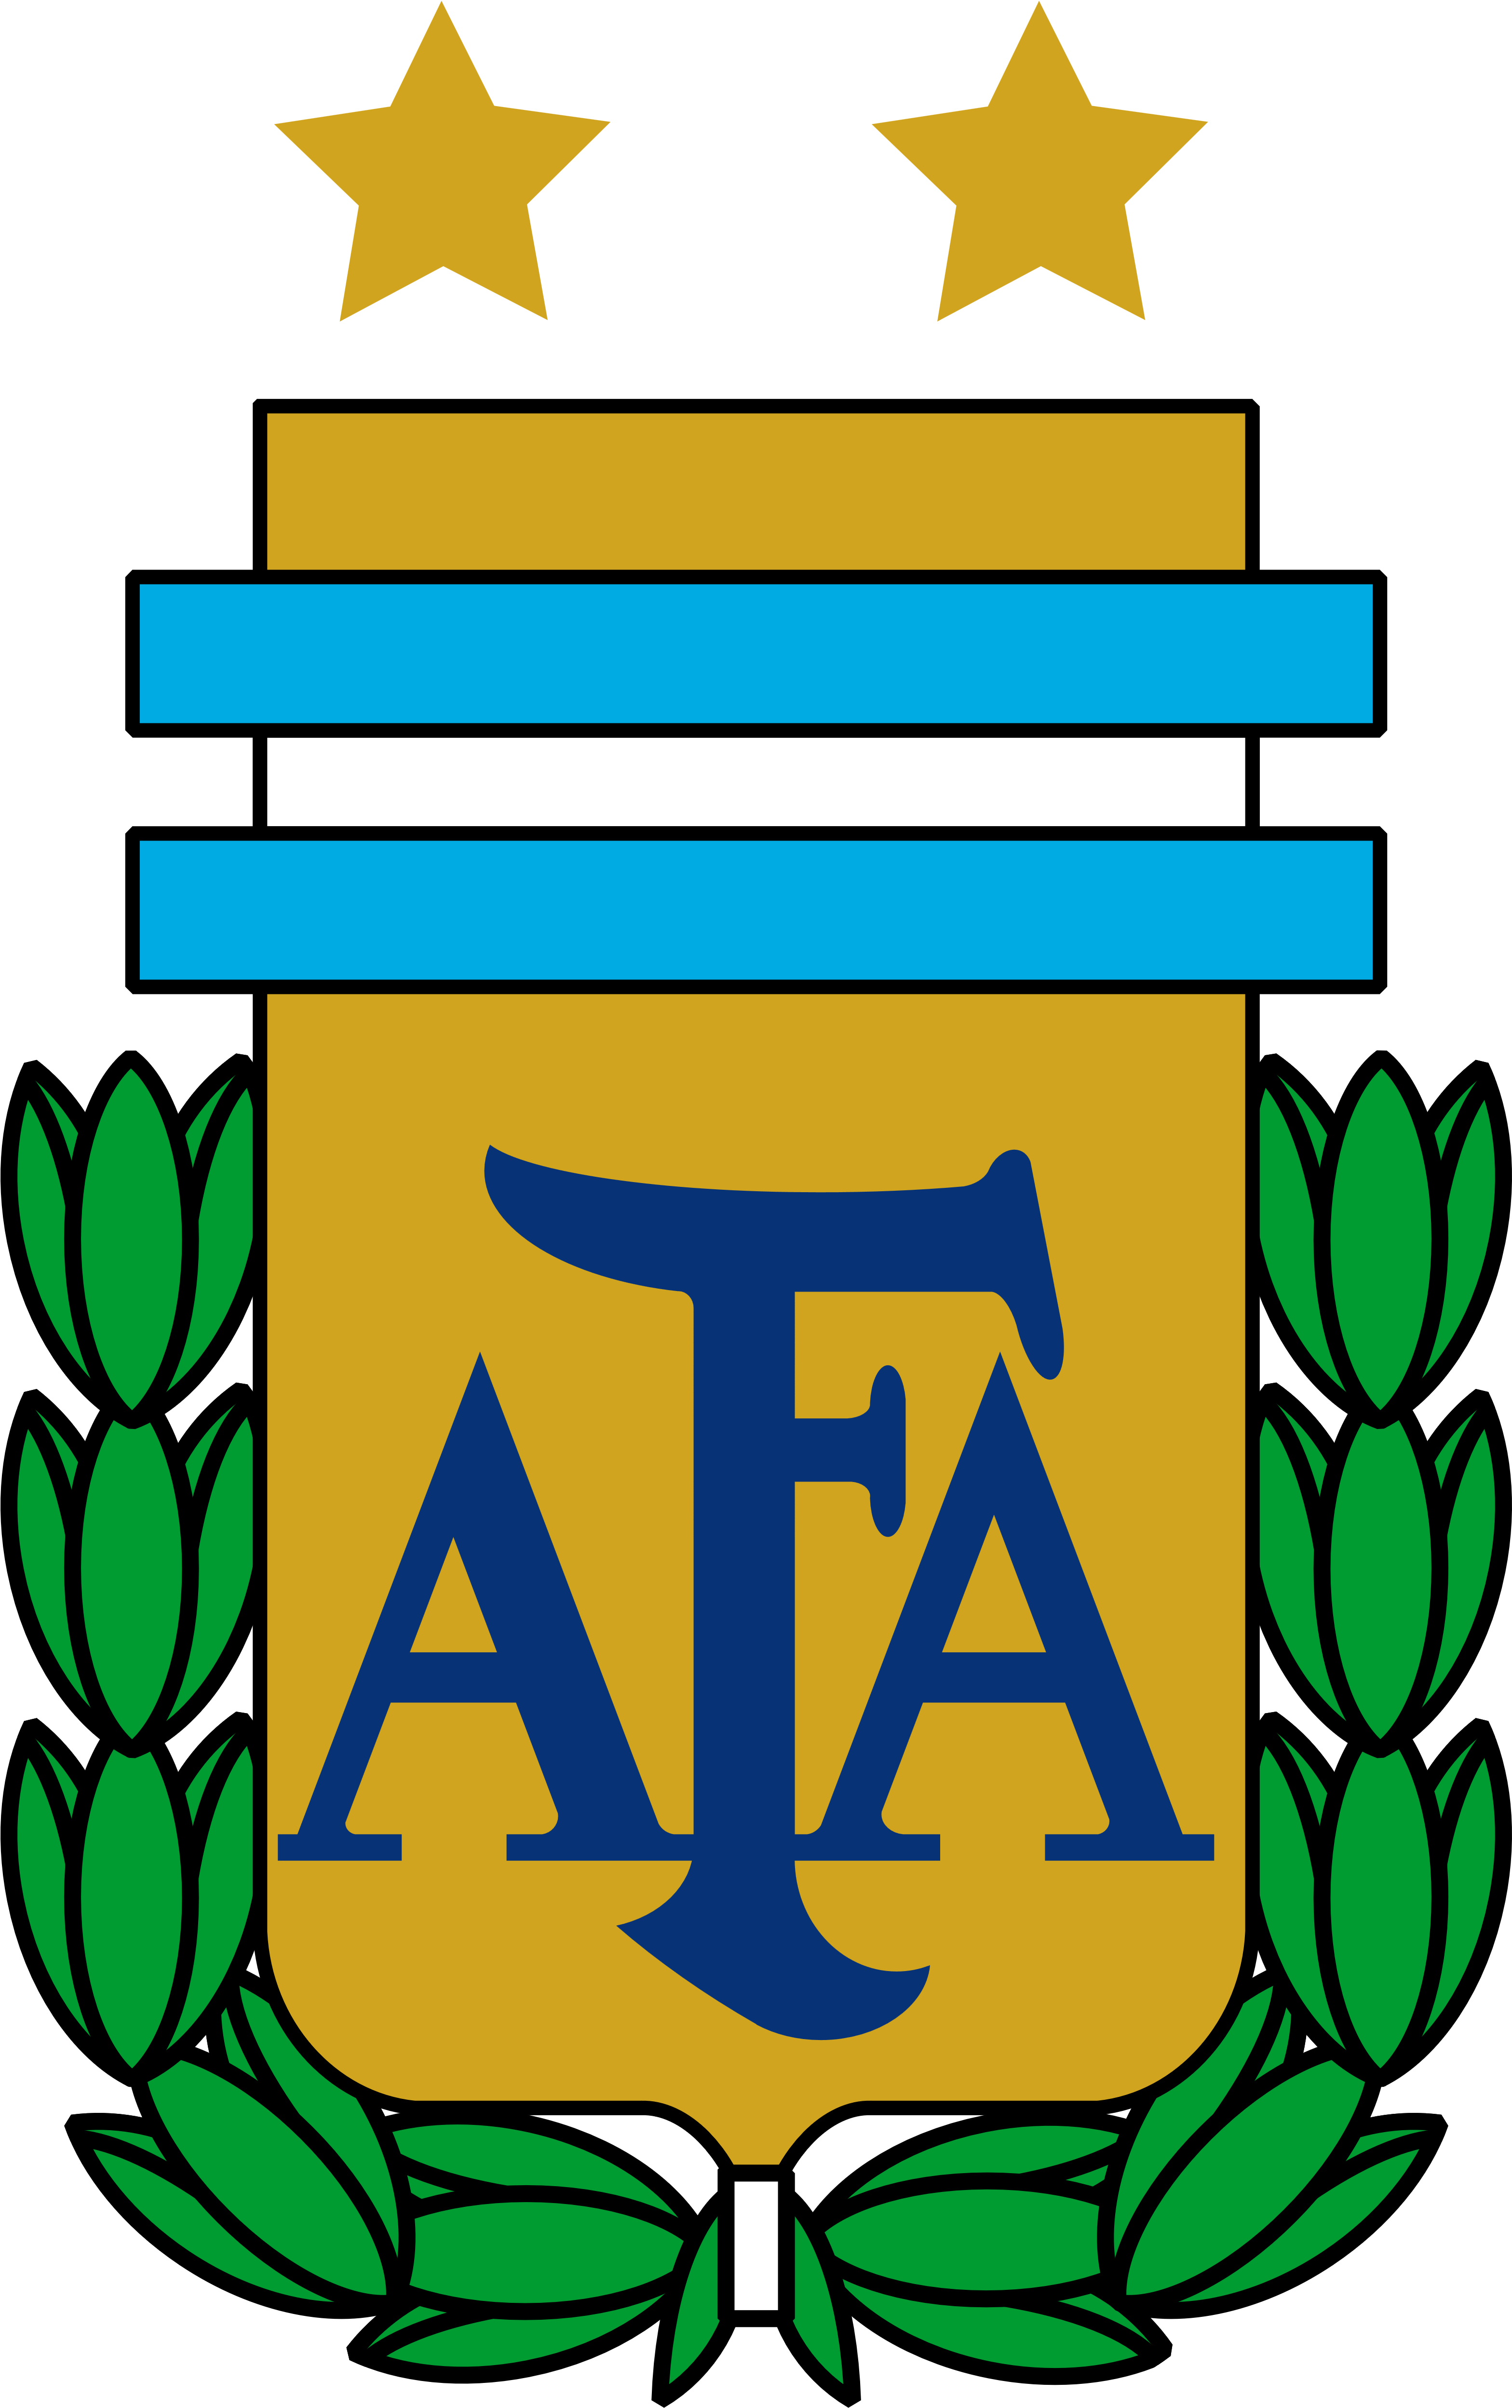 Argentina Soccer Logo Png Picture Free Download - France Vs Argentina World Cup (3135x5000)